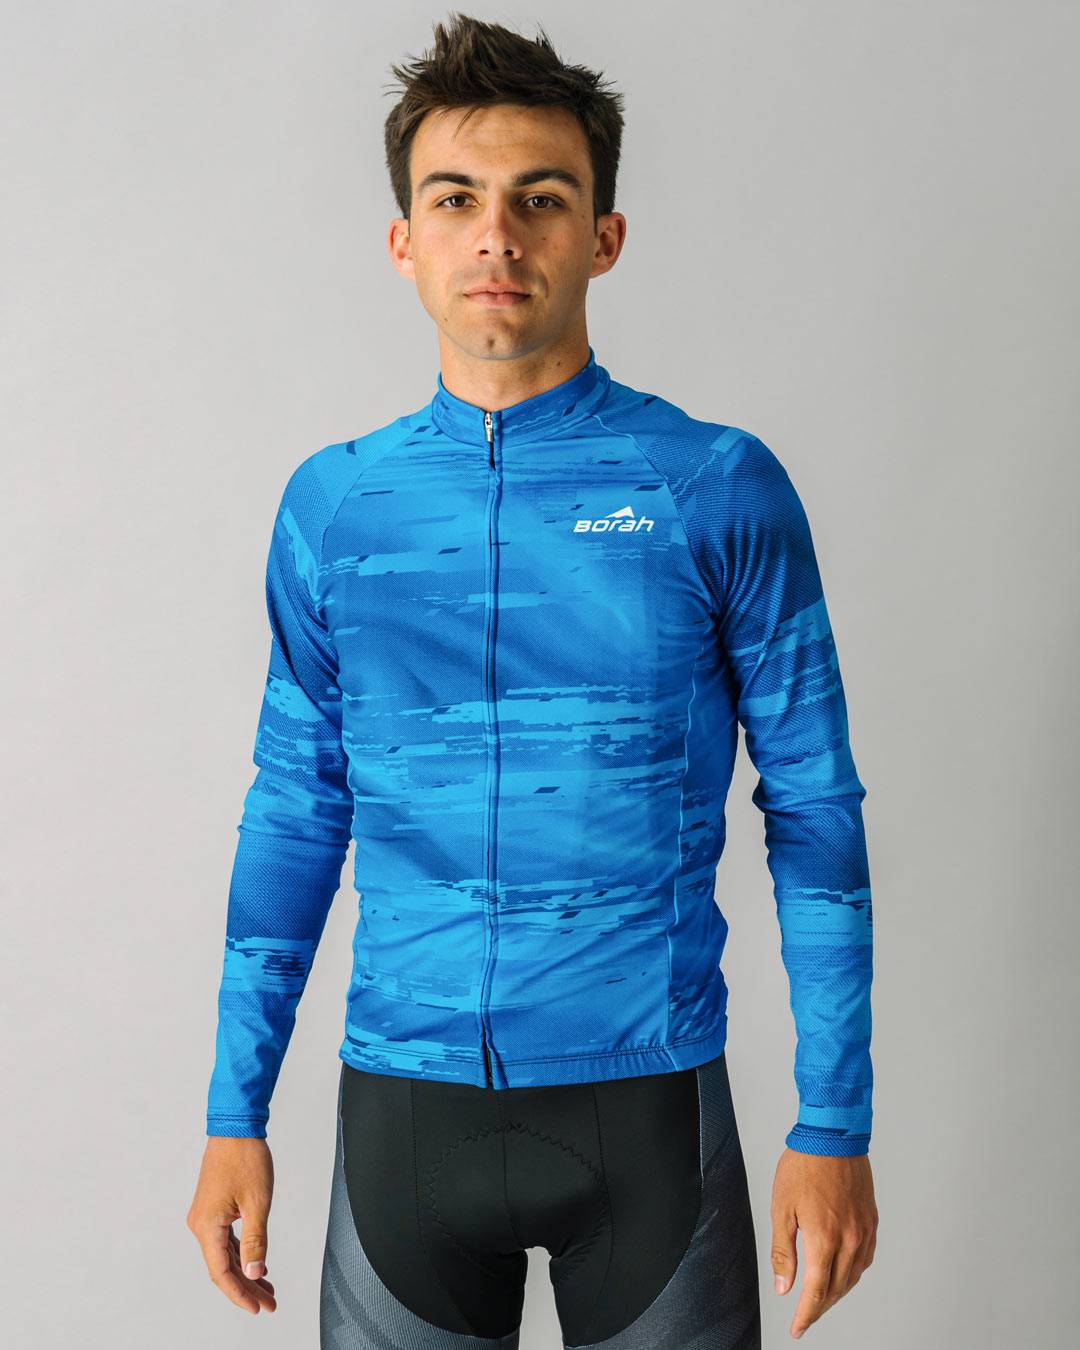 Team Long Sleeve Cycling Jersey, Made in USA